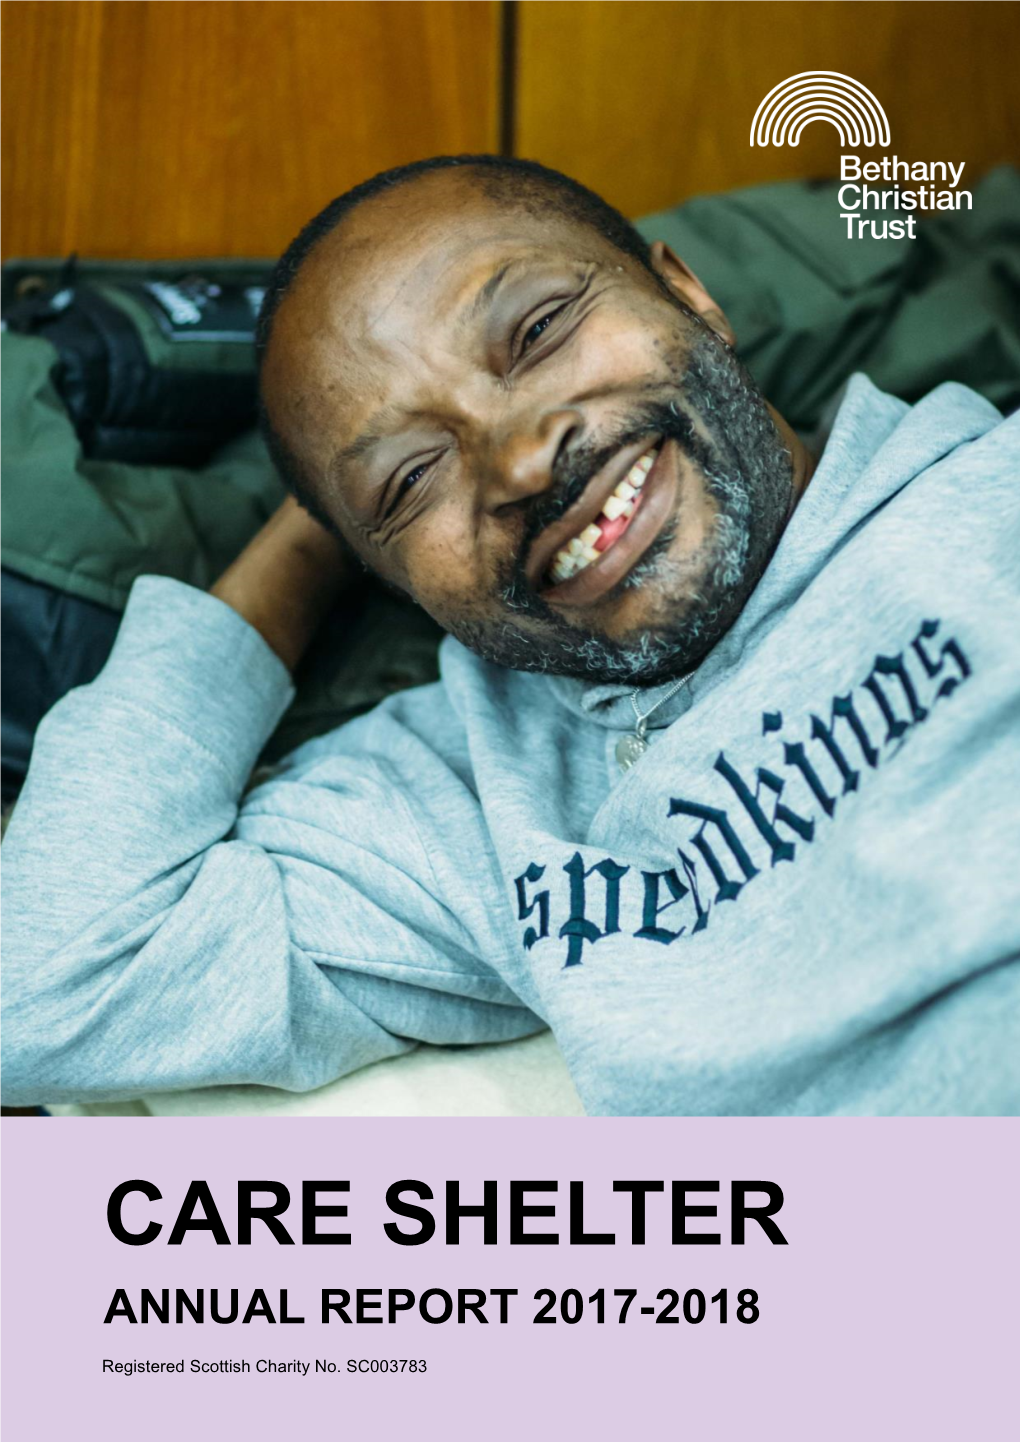 Care Shelter Annual Report 2017-2018